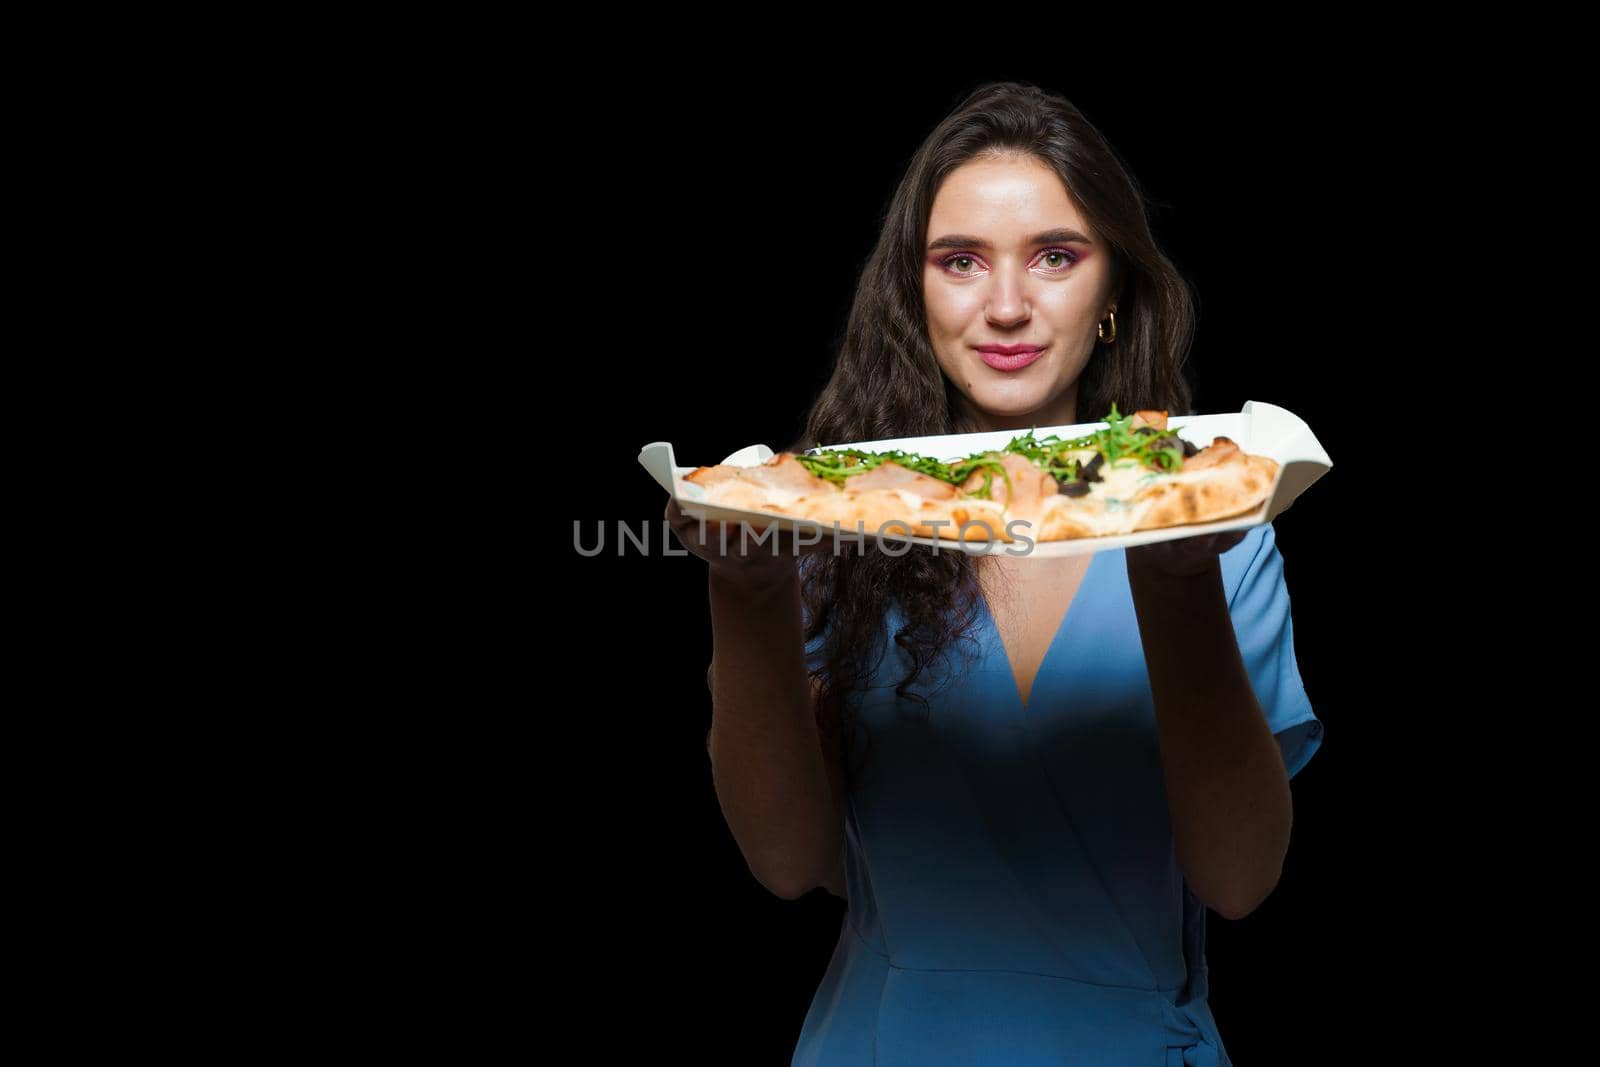 Woman courier with pinsa romana gourmet italian cuisine on black background. Holding scrocchiarella traditional dish. Food delivery from pizzeria. Pinsa with meat, arugula, olives, cheese